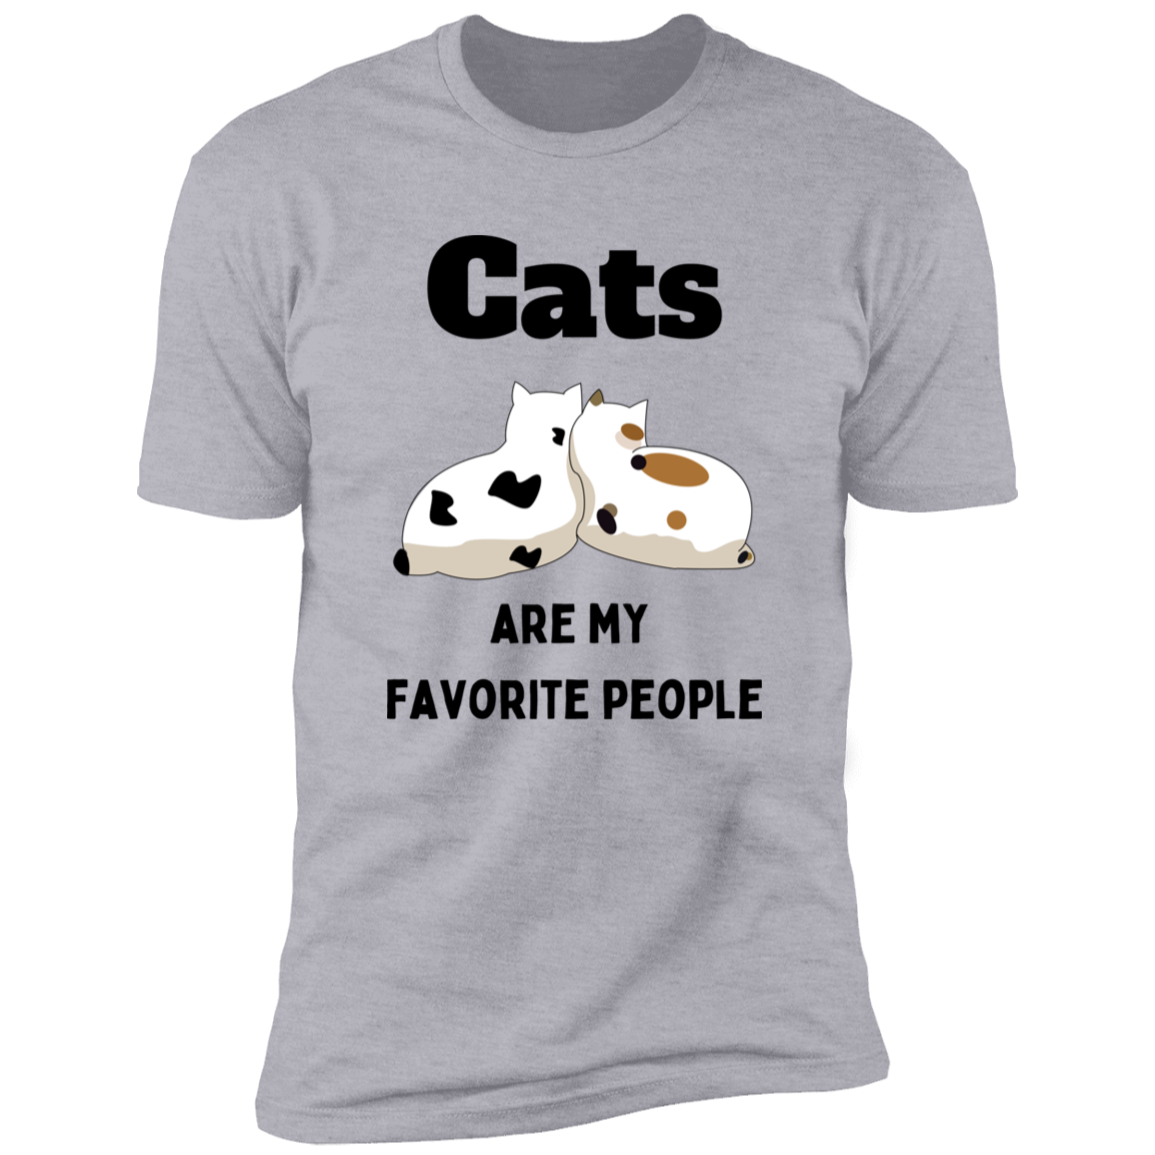 Cats Are My Favorite People T-shirt, Cat Shirt for humans, in light heather gray